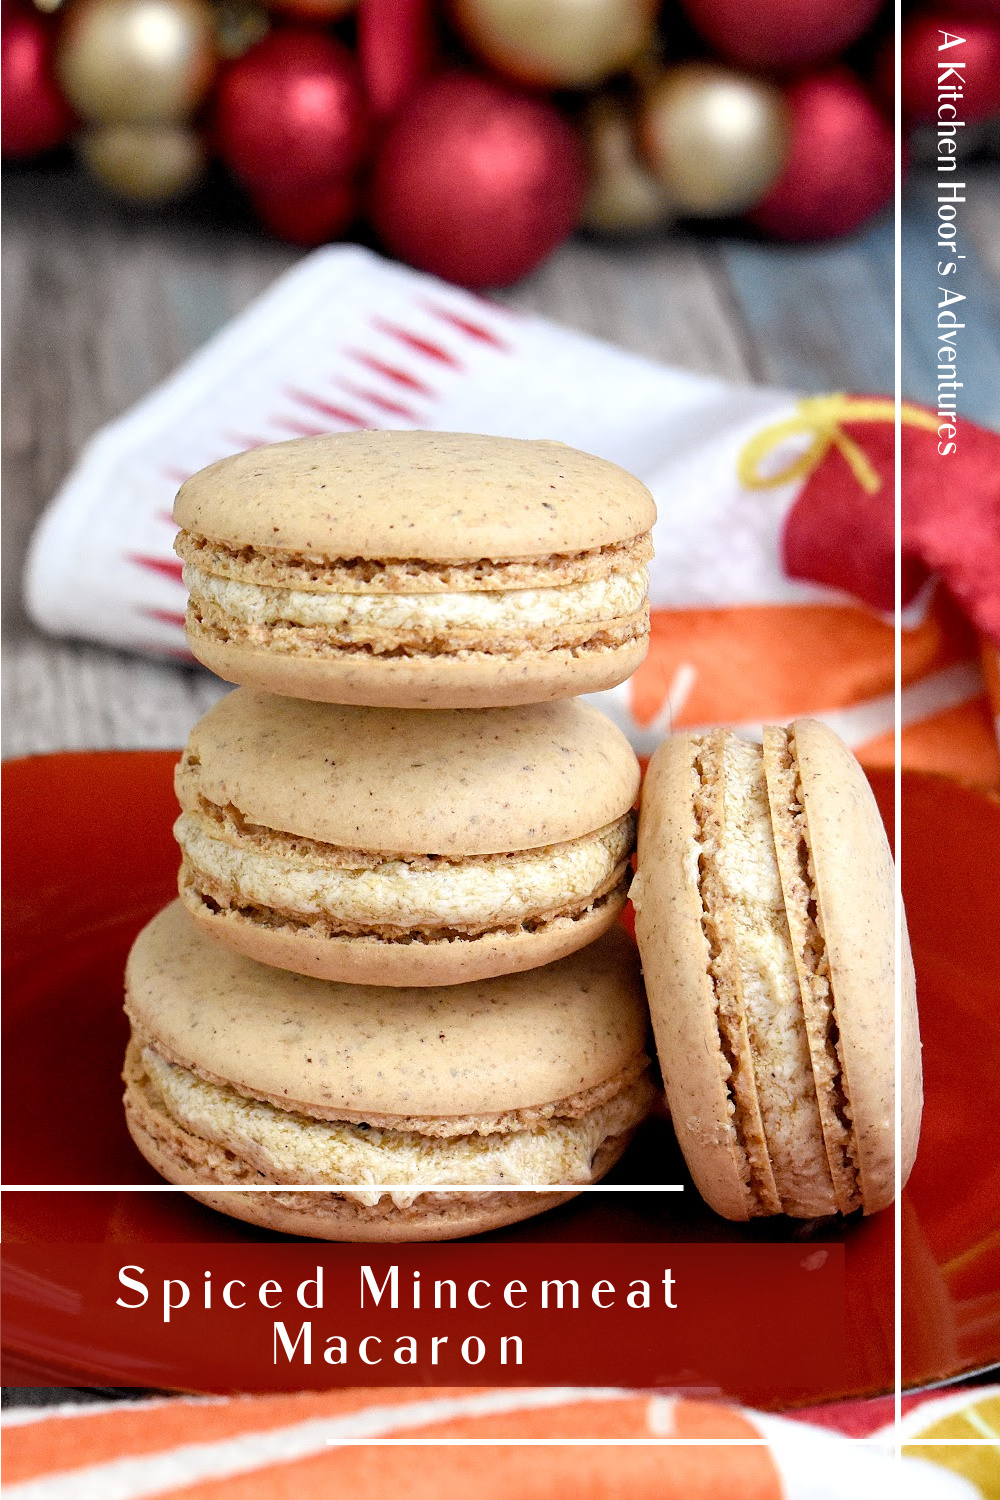 Spiced Mincemeat Macaron is the Ultimate Holiday Treat